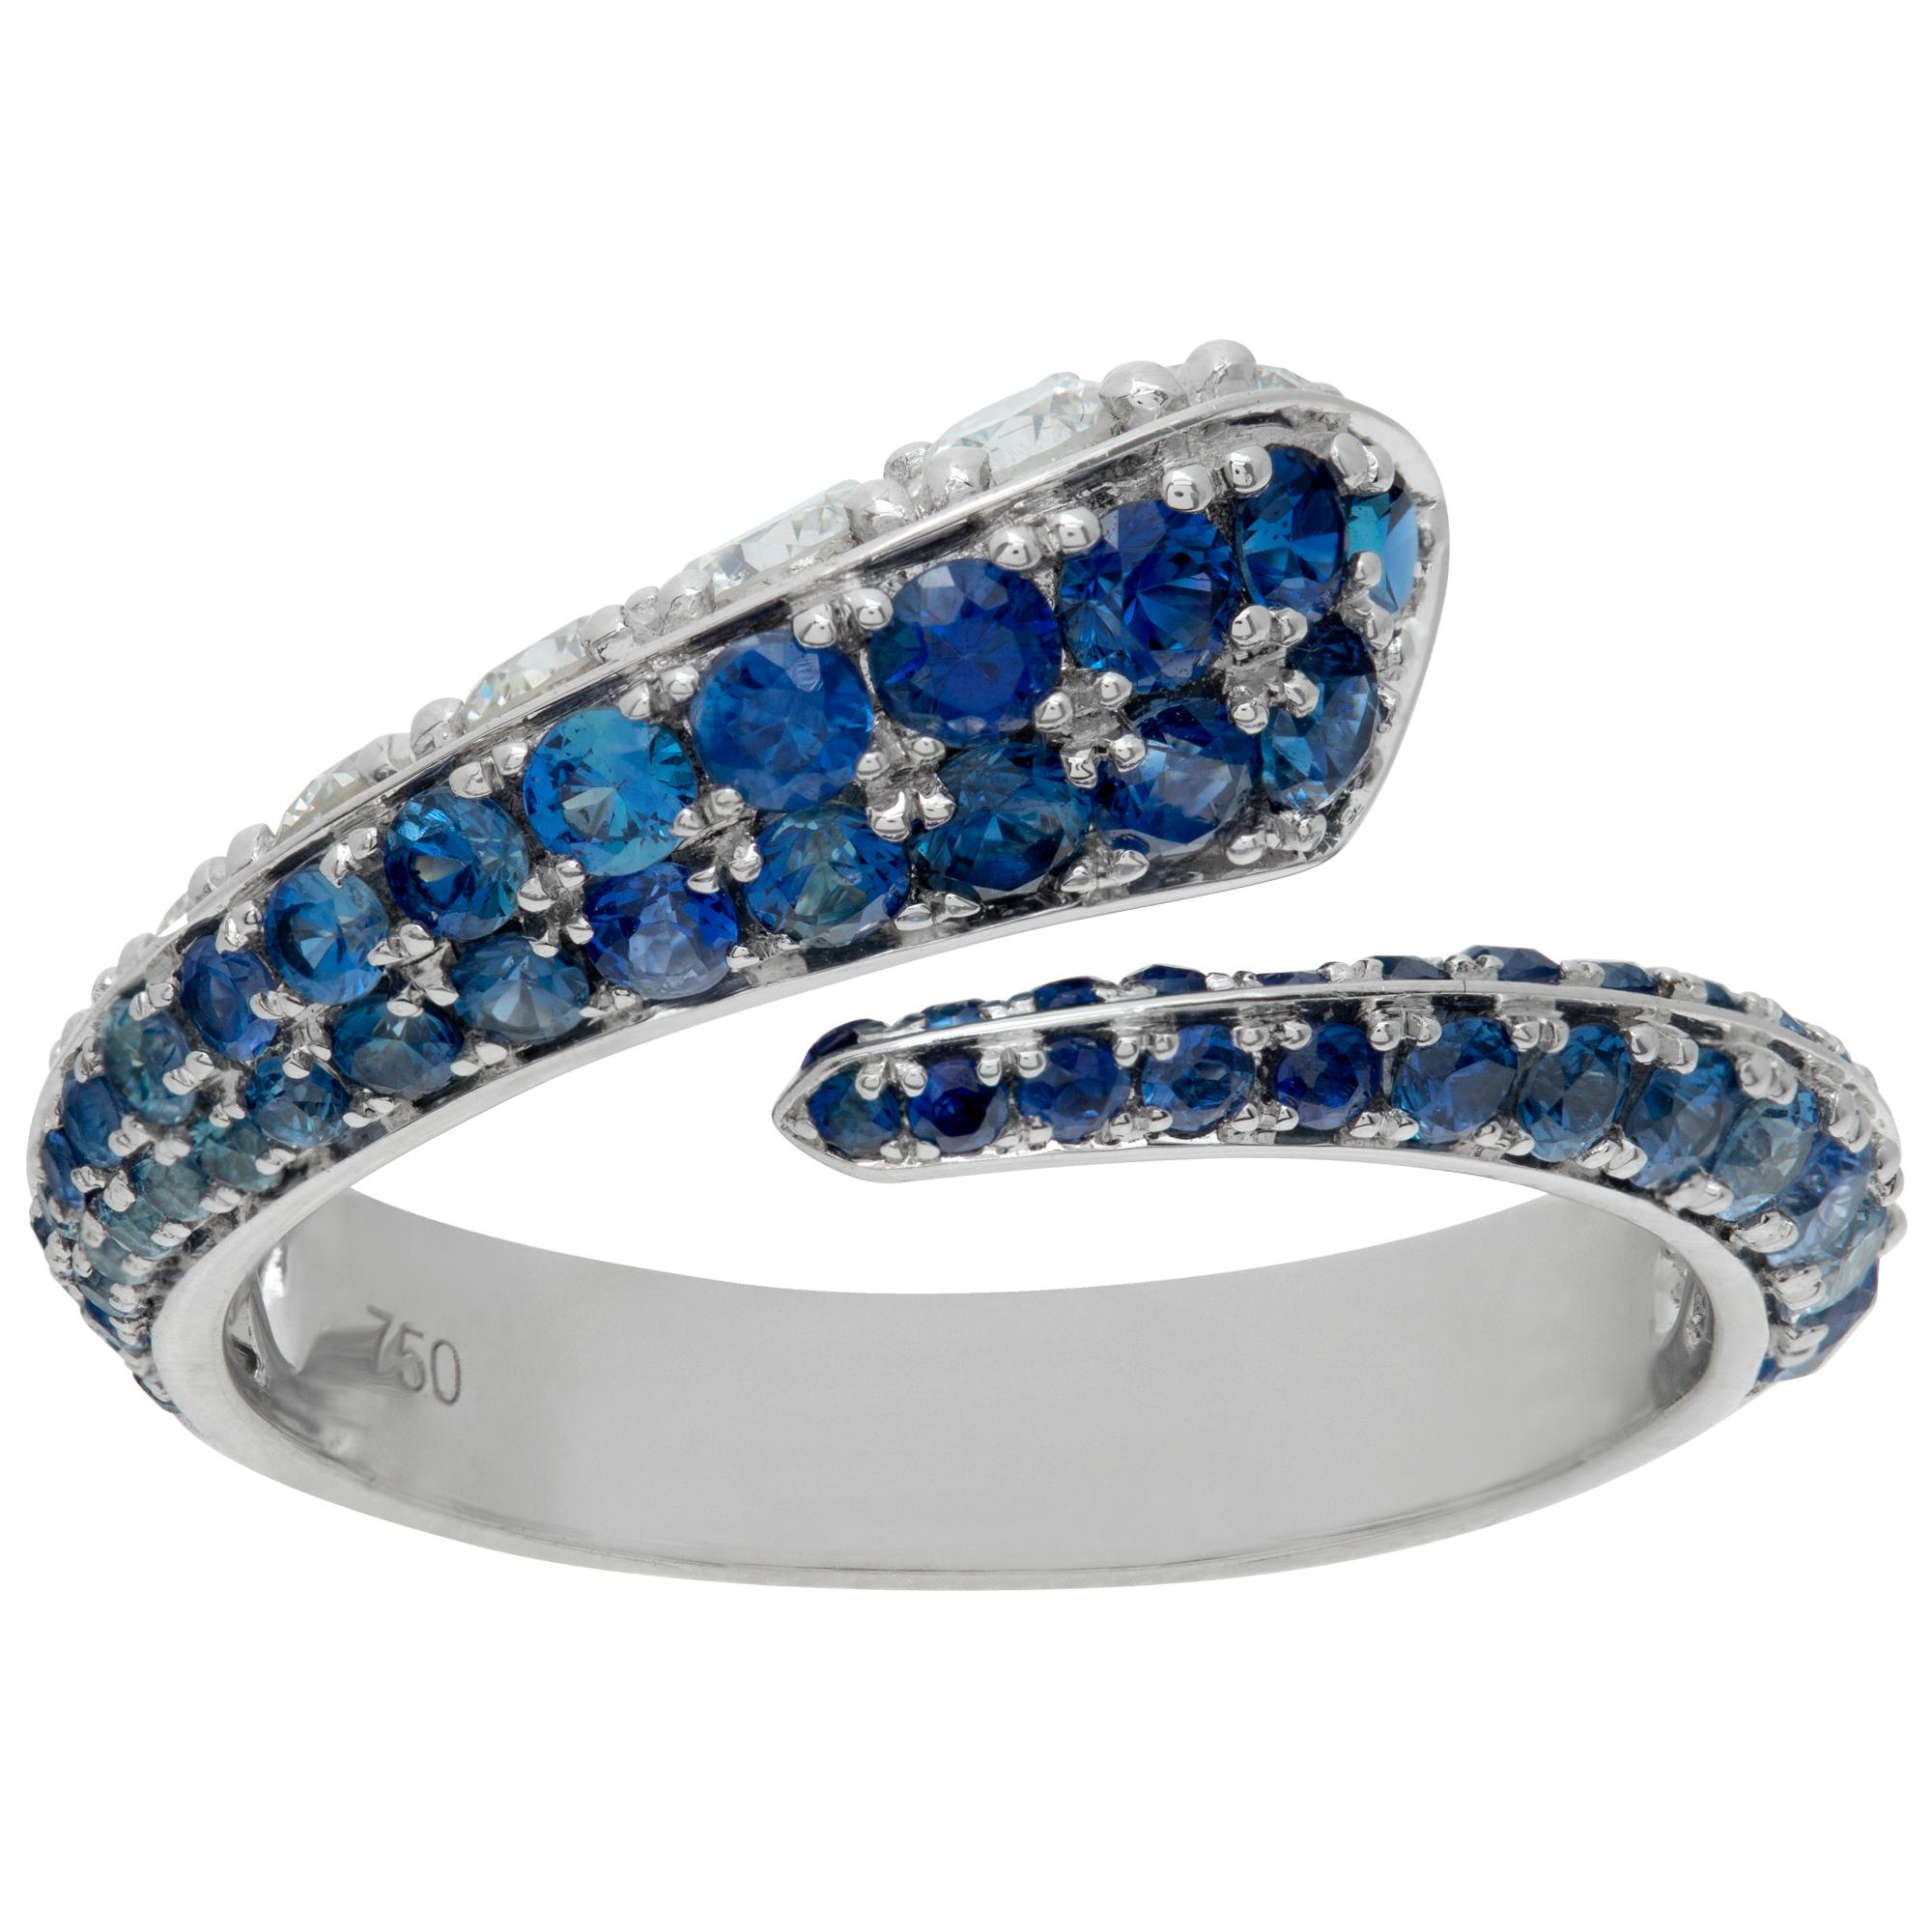 Diamond and blue sapphire crossover ring in 18k white gold. Round brilliant cut diamonds approx. weight: 0.54 carat, estimate: G-H Color, VS Clarity. Round brilliant cut blue sapphire approx. weight: 1.28 carat. . Size 6..This Diamond/Sapphires ring